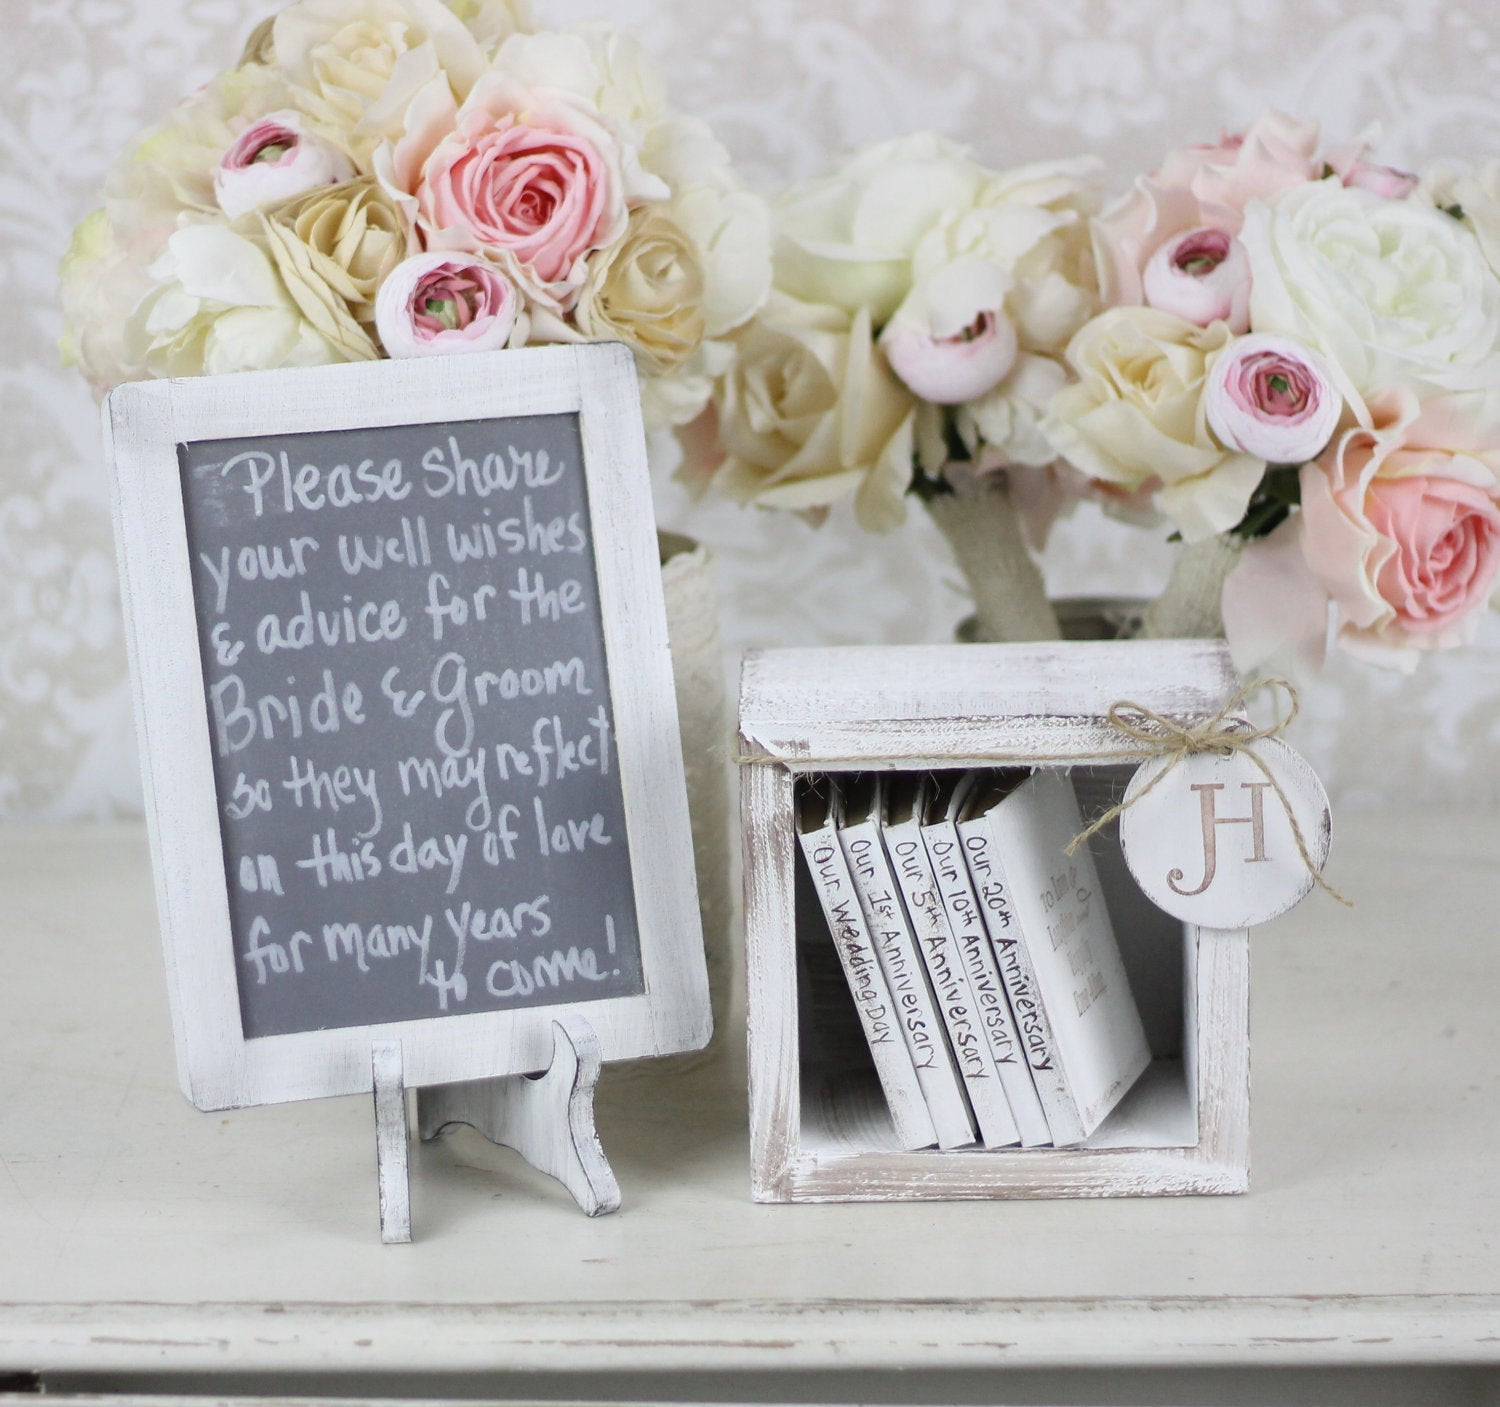 Shabby Chic Wedding Guest Book
 Rustic Guest Book Alternative Shabby Chic Wedding by